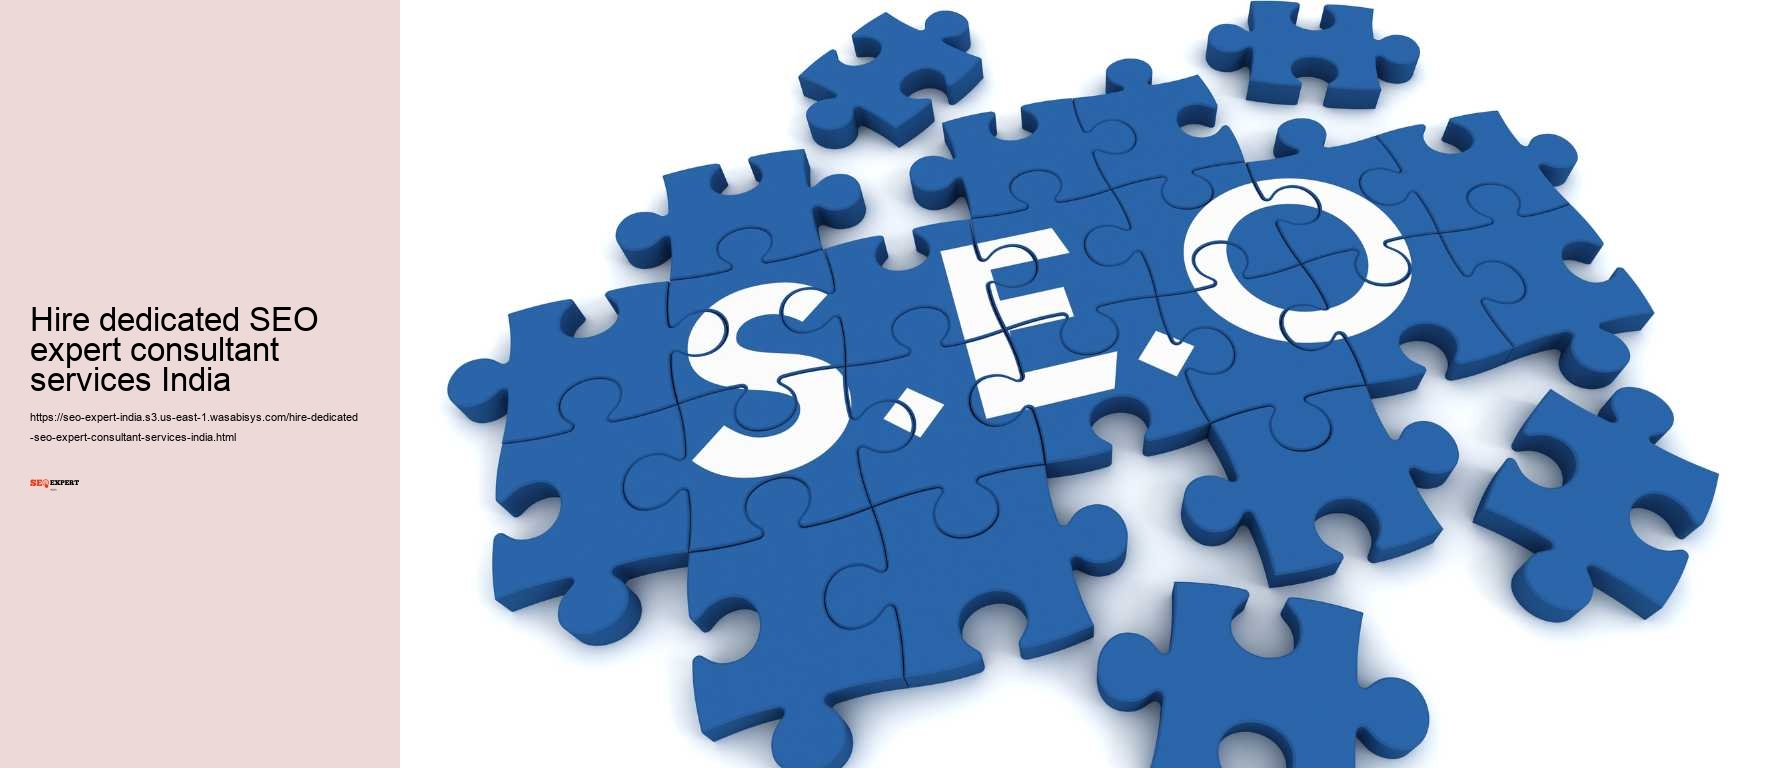 Hire dedicated SEO expert consultant services India